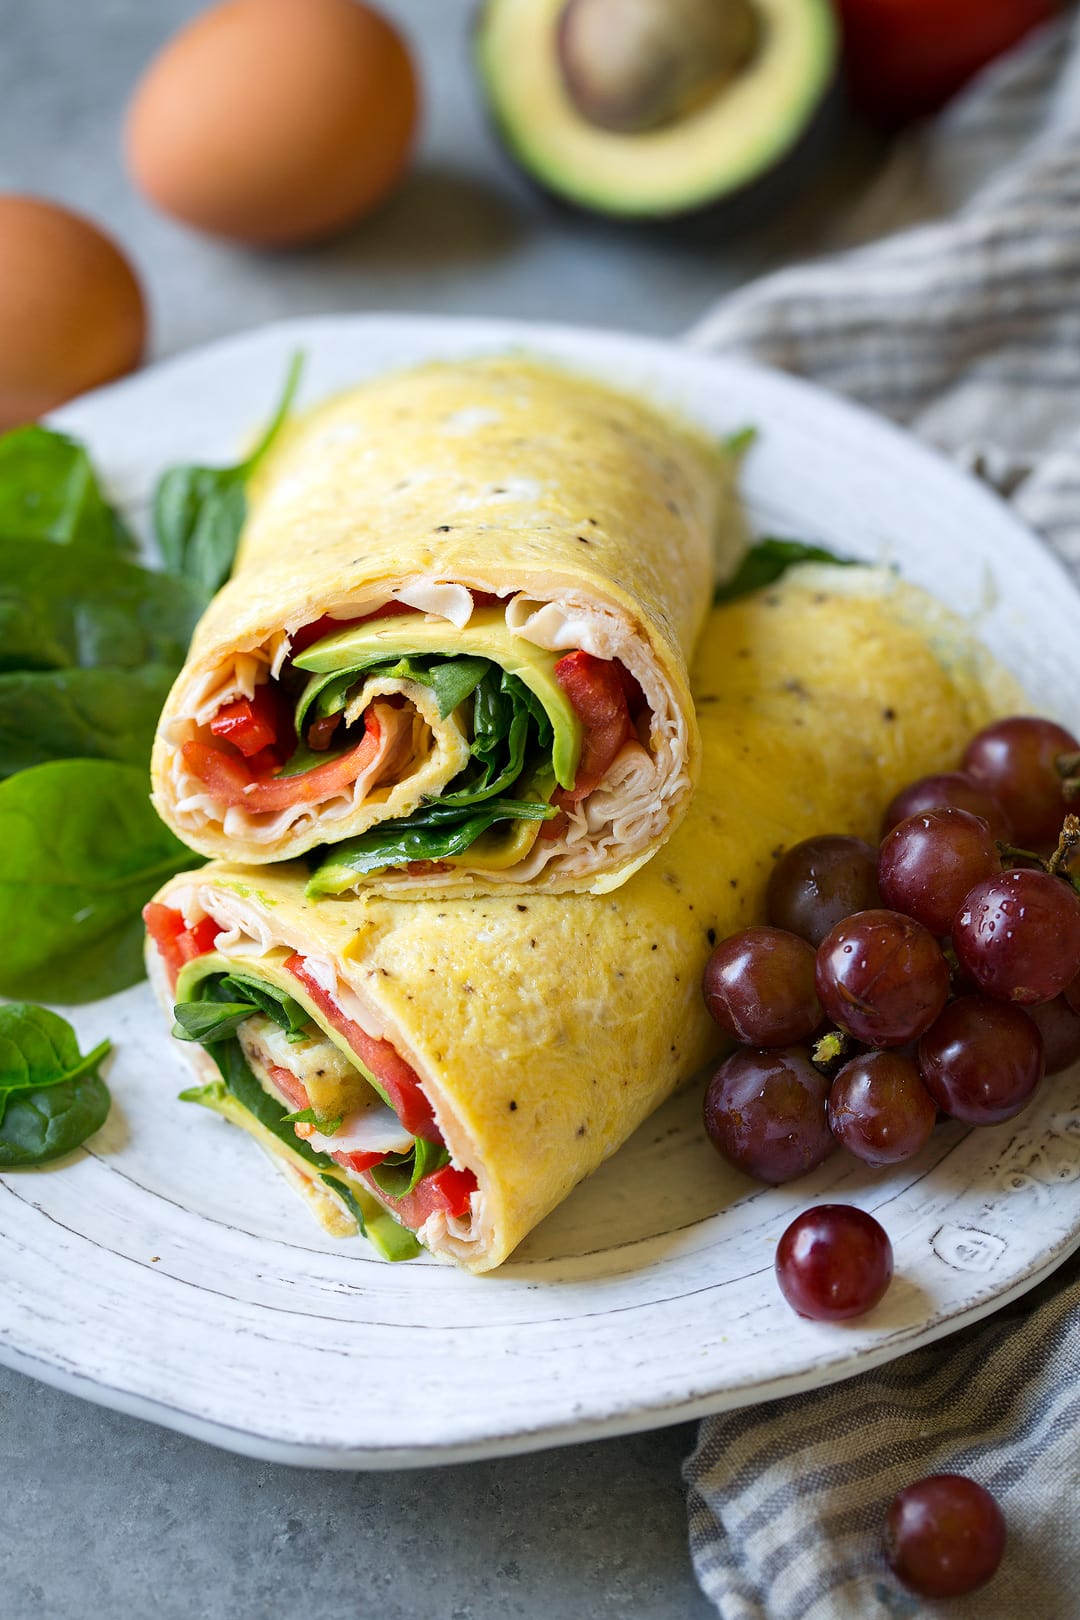 Egg Wrap Recipe (with Turkey and Avocado) - Cooking Classy